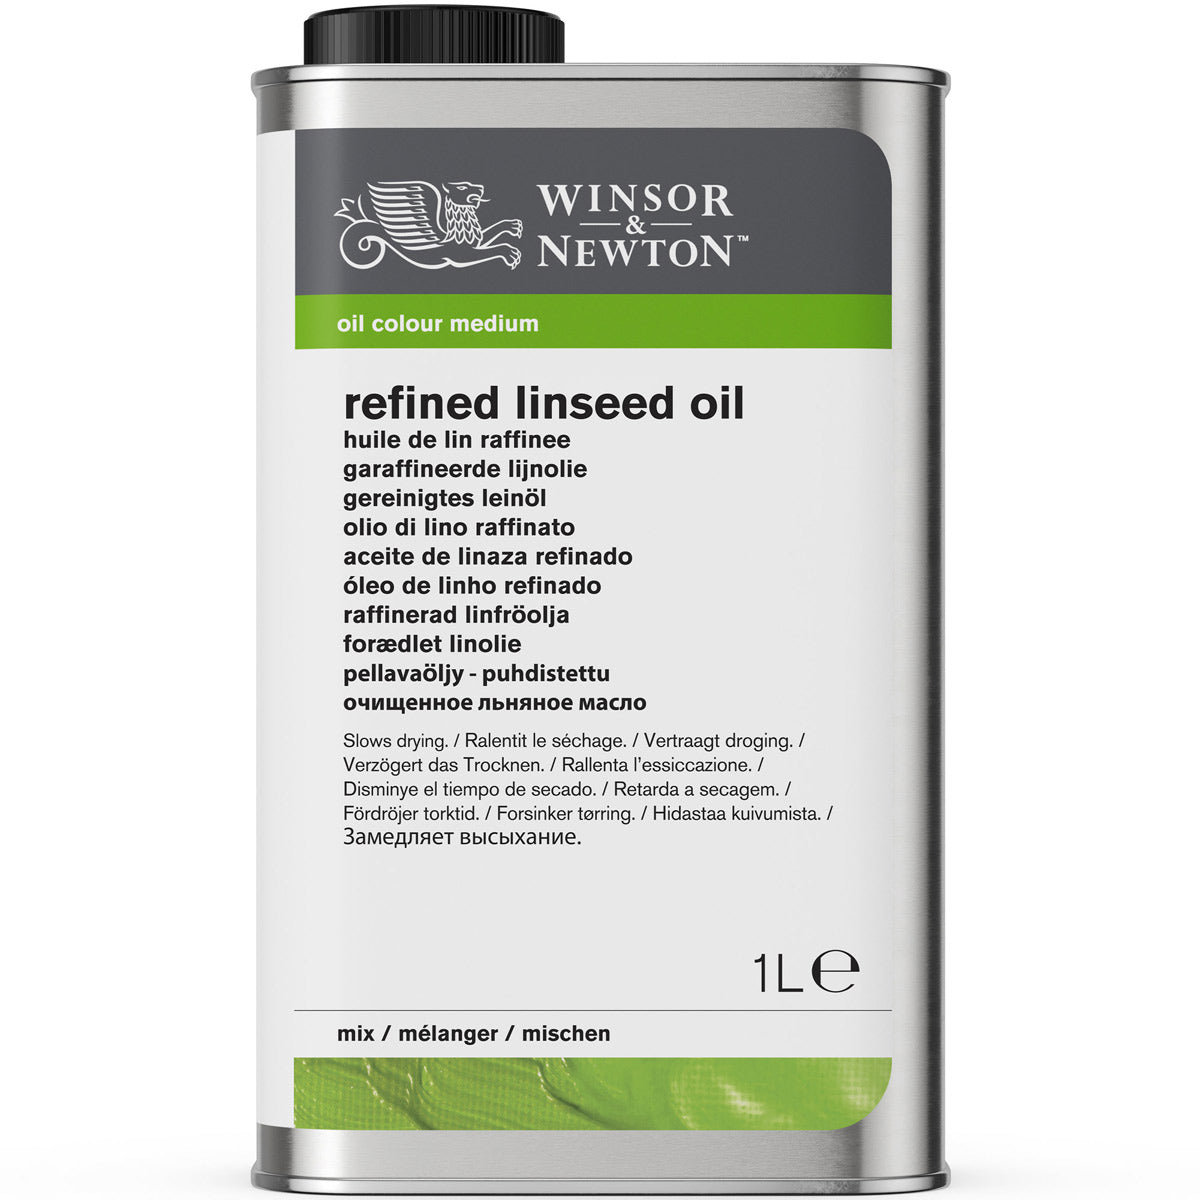 Winsor and Newton - Refined Linseed Oil - 1 Litre